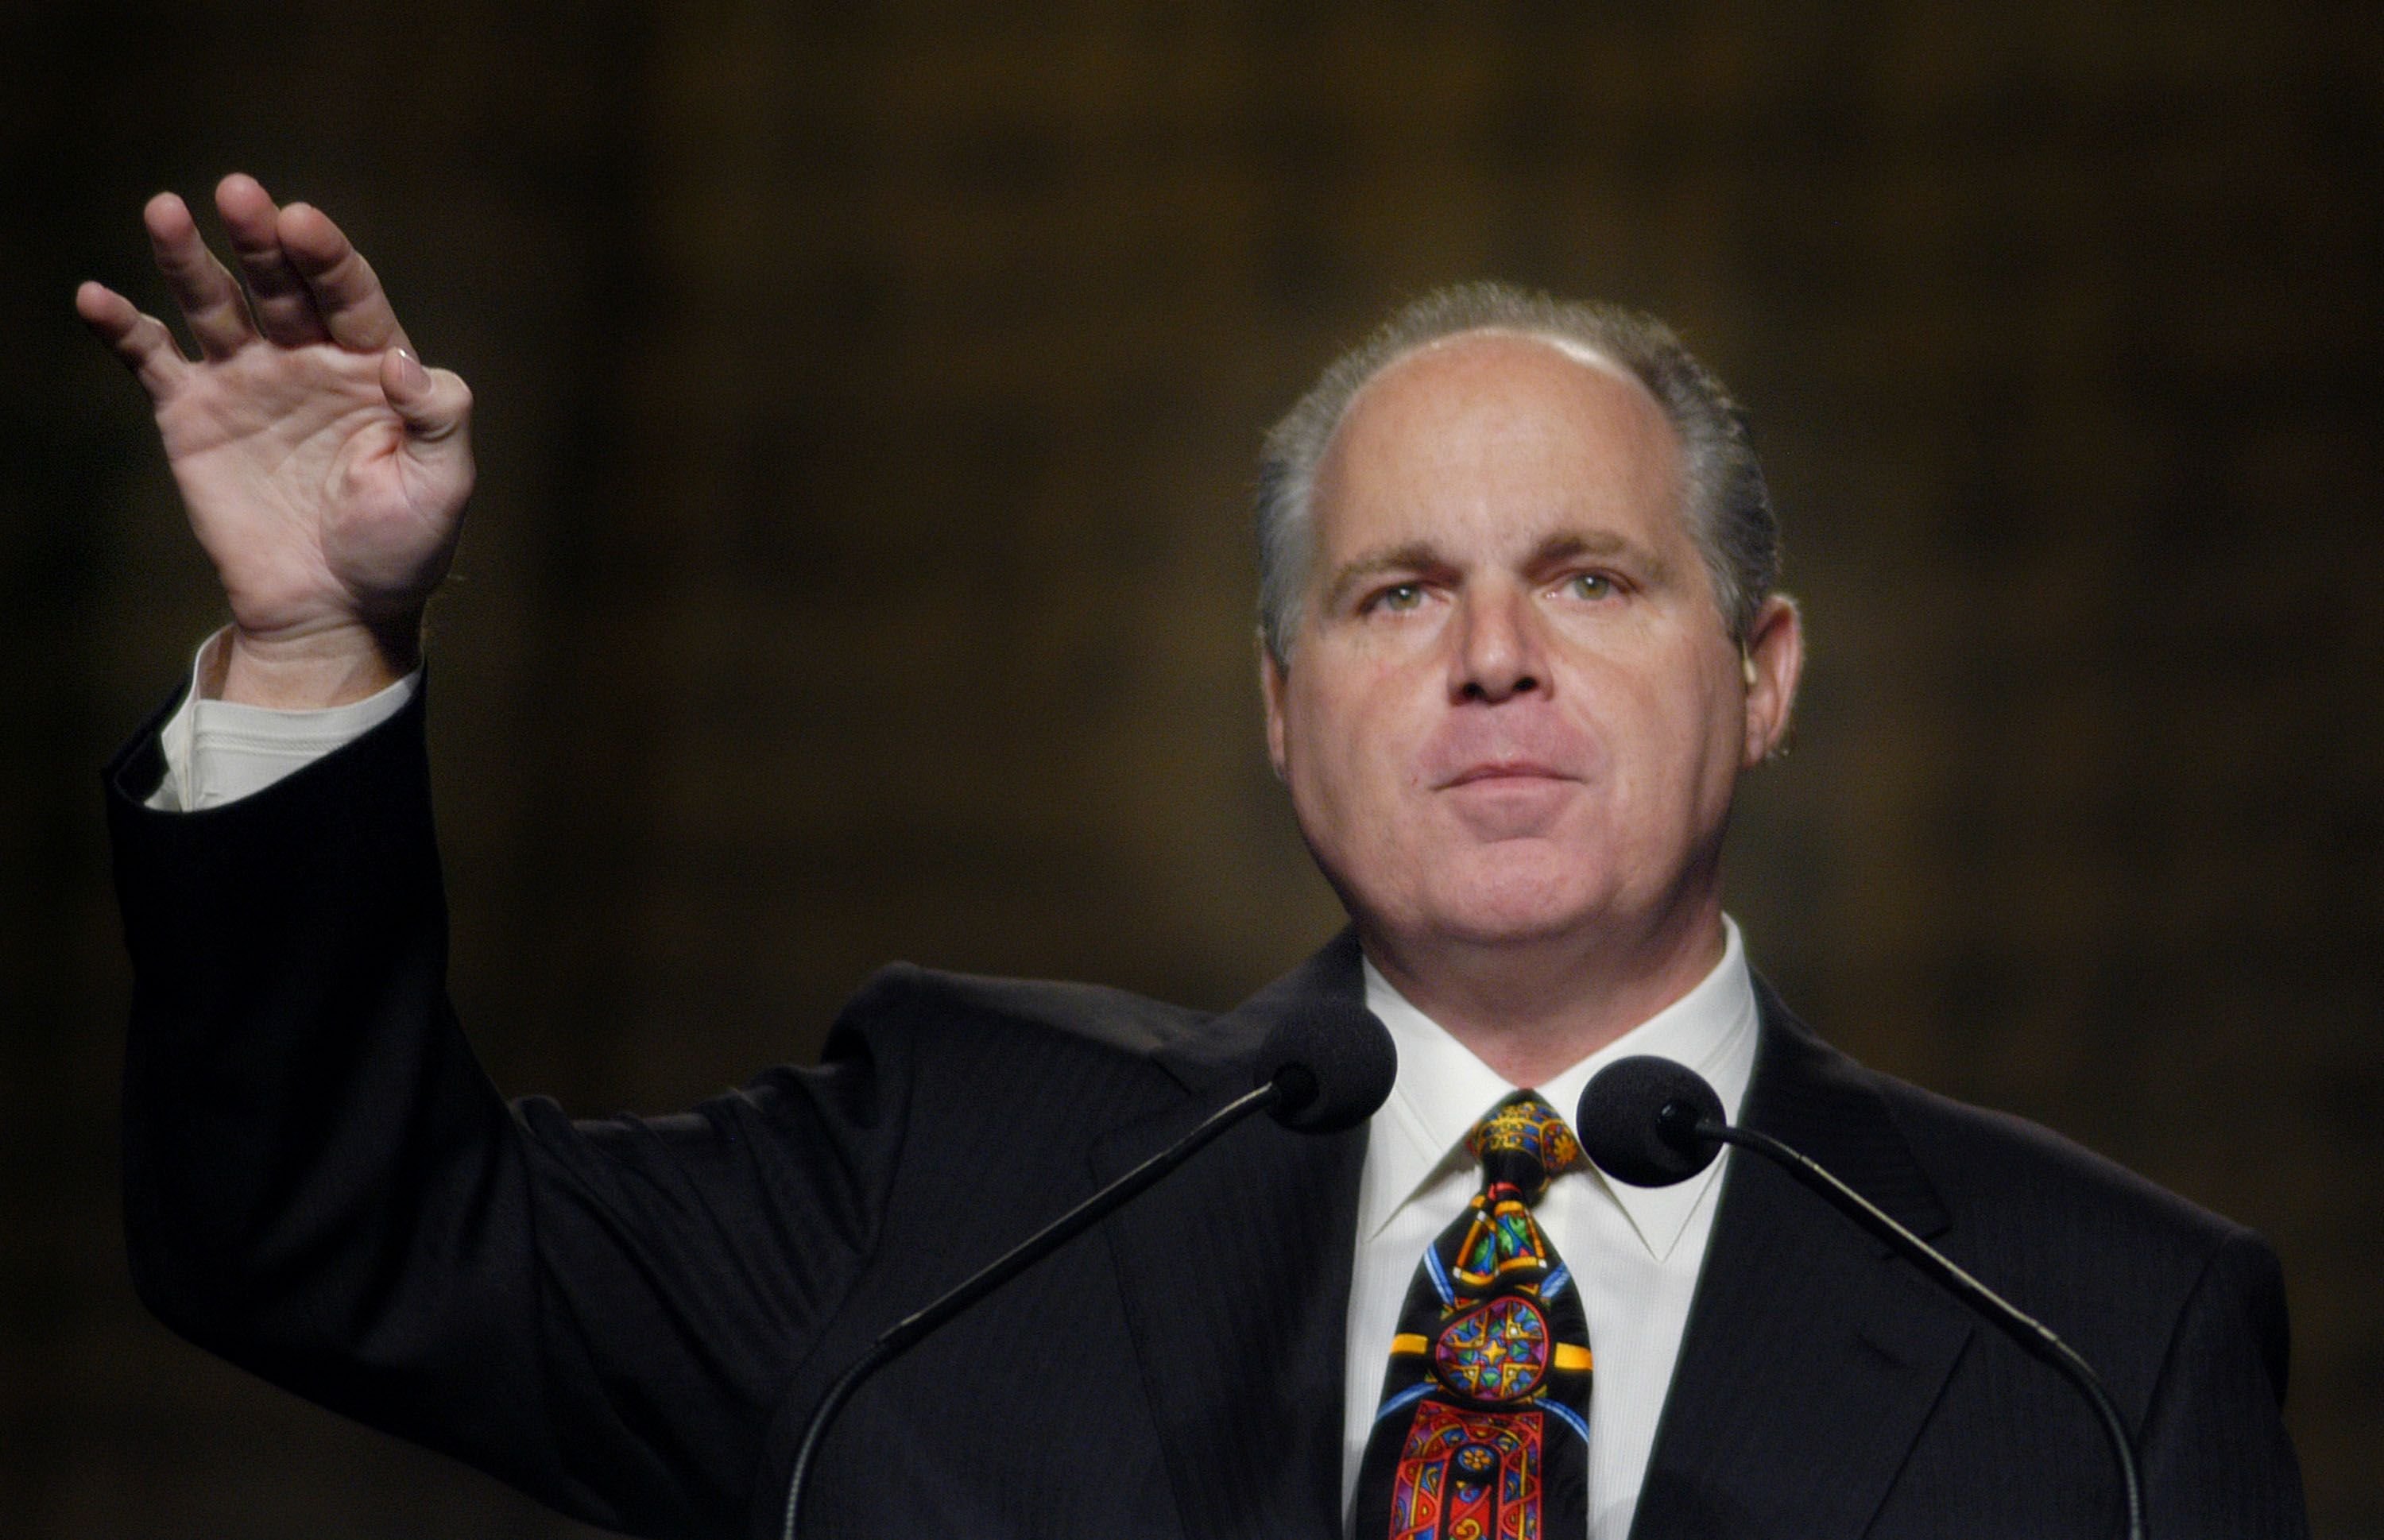 Rush Limbaugh during the National Association of Broadcasters October 2, 2003 in Philadelphia, Pennsylvania. | Source: Getty Images